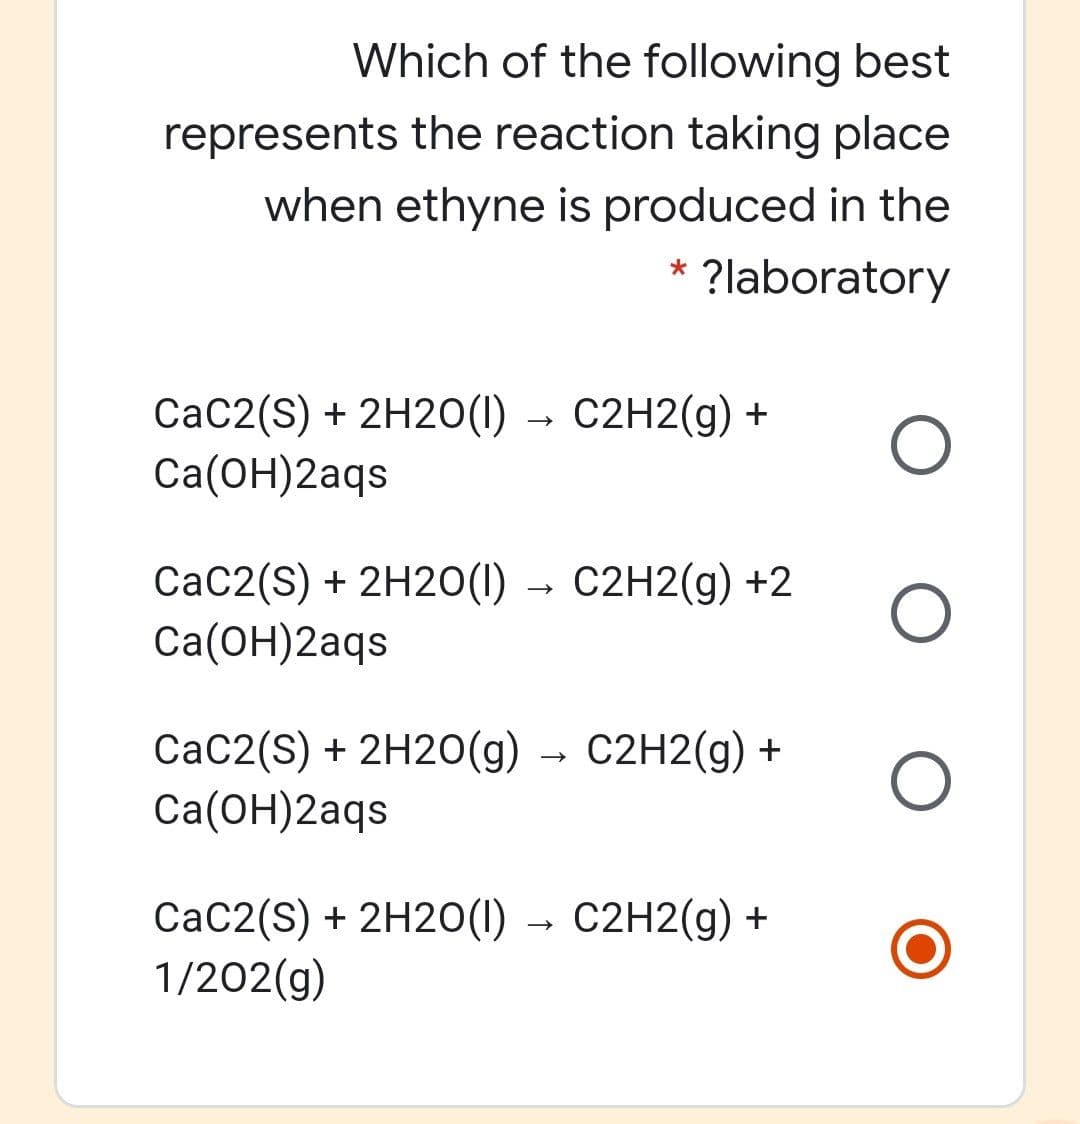 Which of the following best
represents the reaction taking place
when ethyne is produced in the
?laboratory
CaC2(S) + 2H20(1) → C2H2(g) +
Ca(ОН)2аgs
CaC2(S) + 2H2O(1) → C2H2(g) +2
Ca(ОН)2аqs
CaC2(S) + 2H20(g) → C2H2(g) +
Cа(ОН)2аqs
СаC2(S) + 2H20() — С2H2(9) +
1/202(g)
